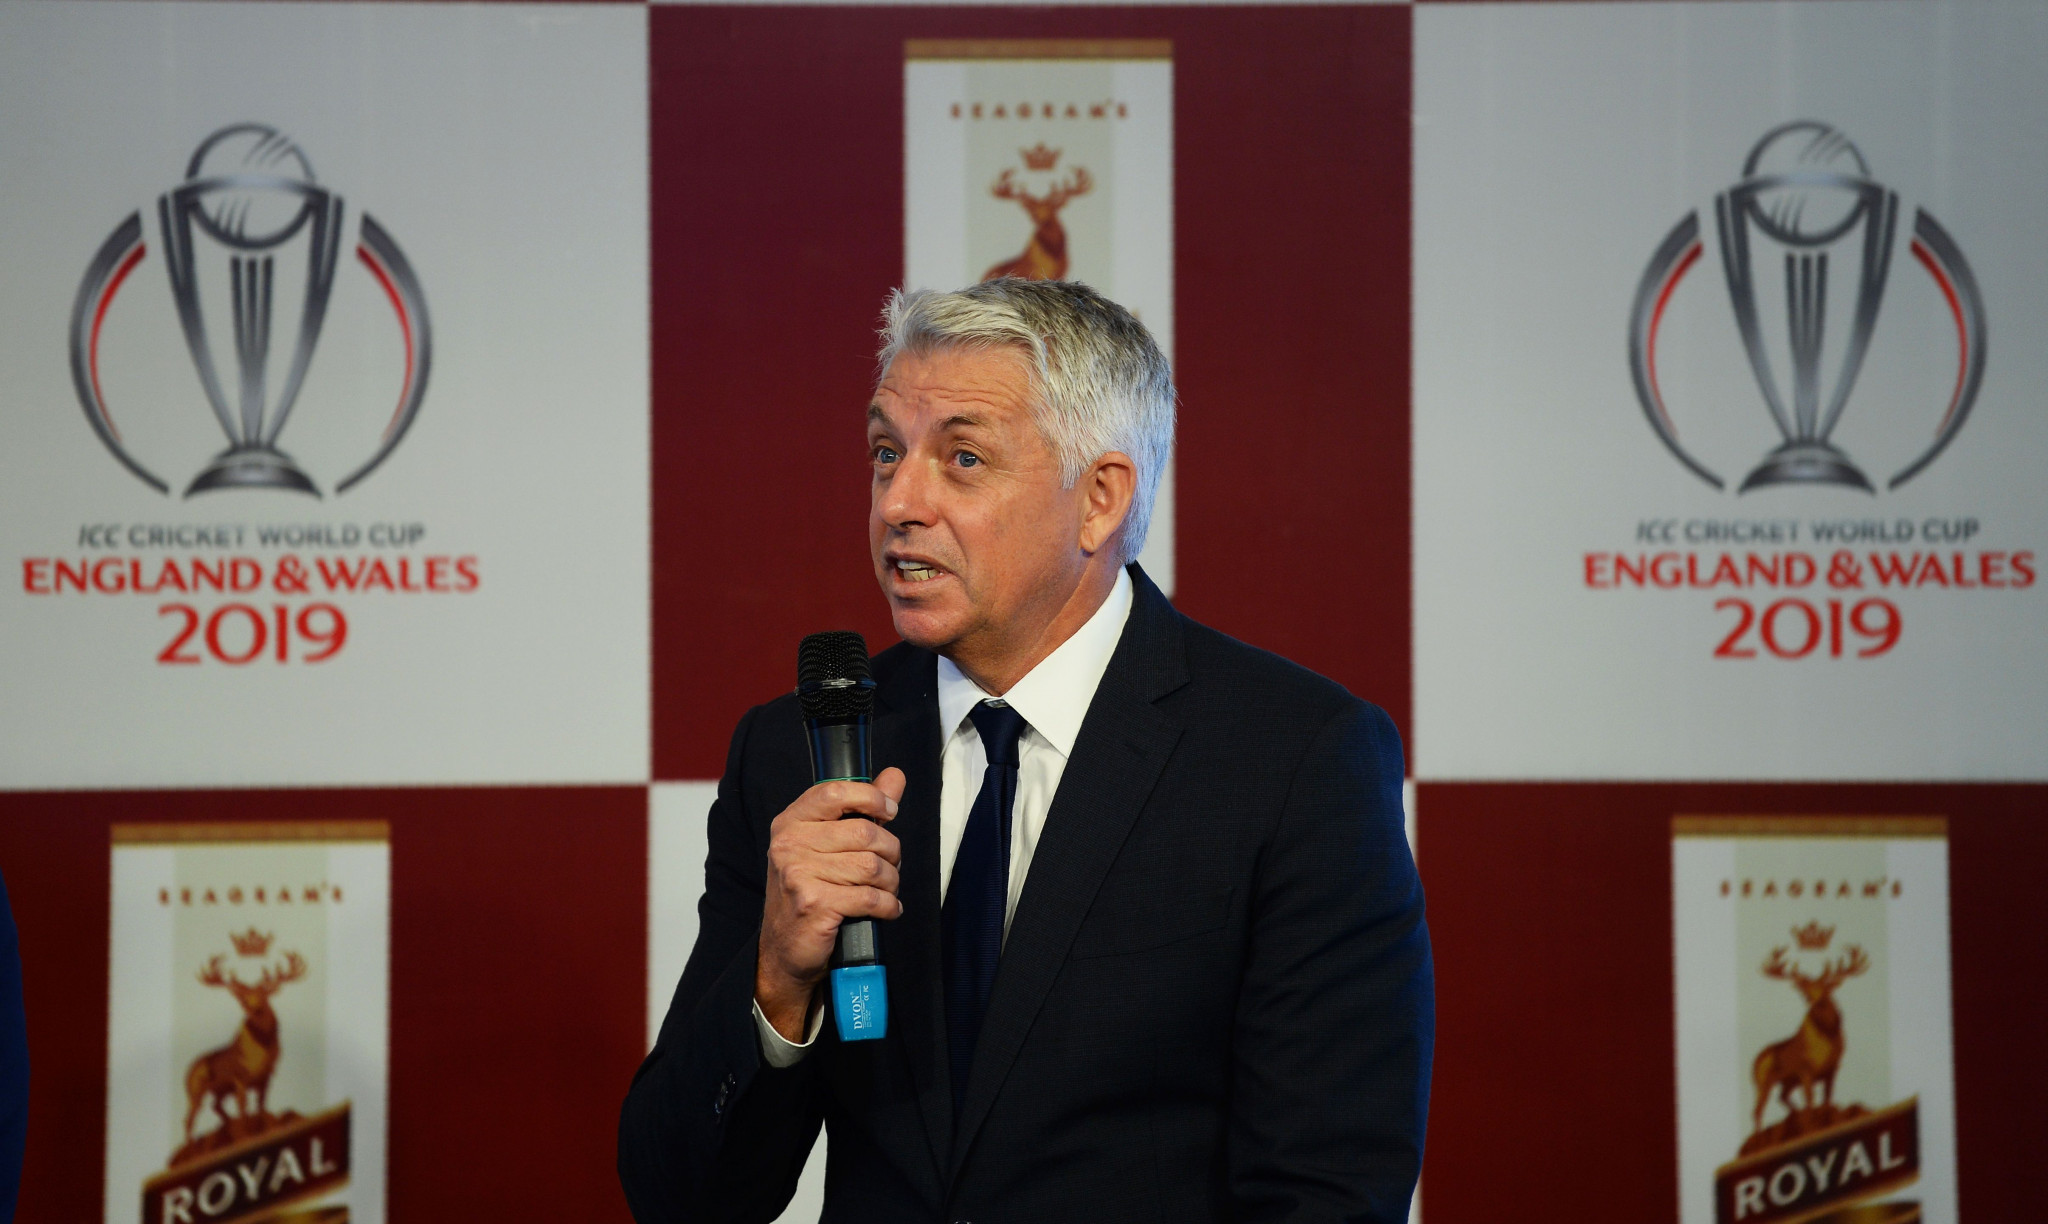 ICC chief executive David Richardson still expects this year's World Cup match between India and Pakistan to go ahead ©Getty Images